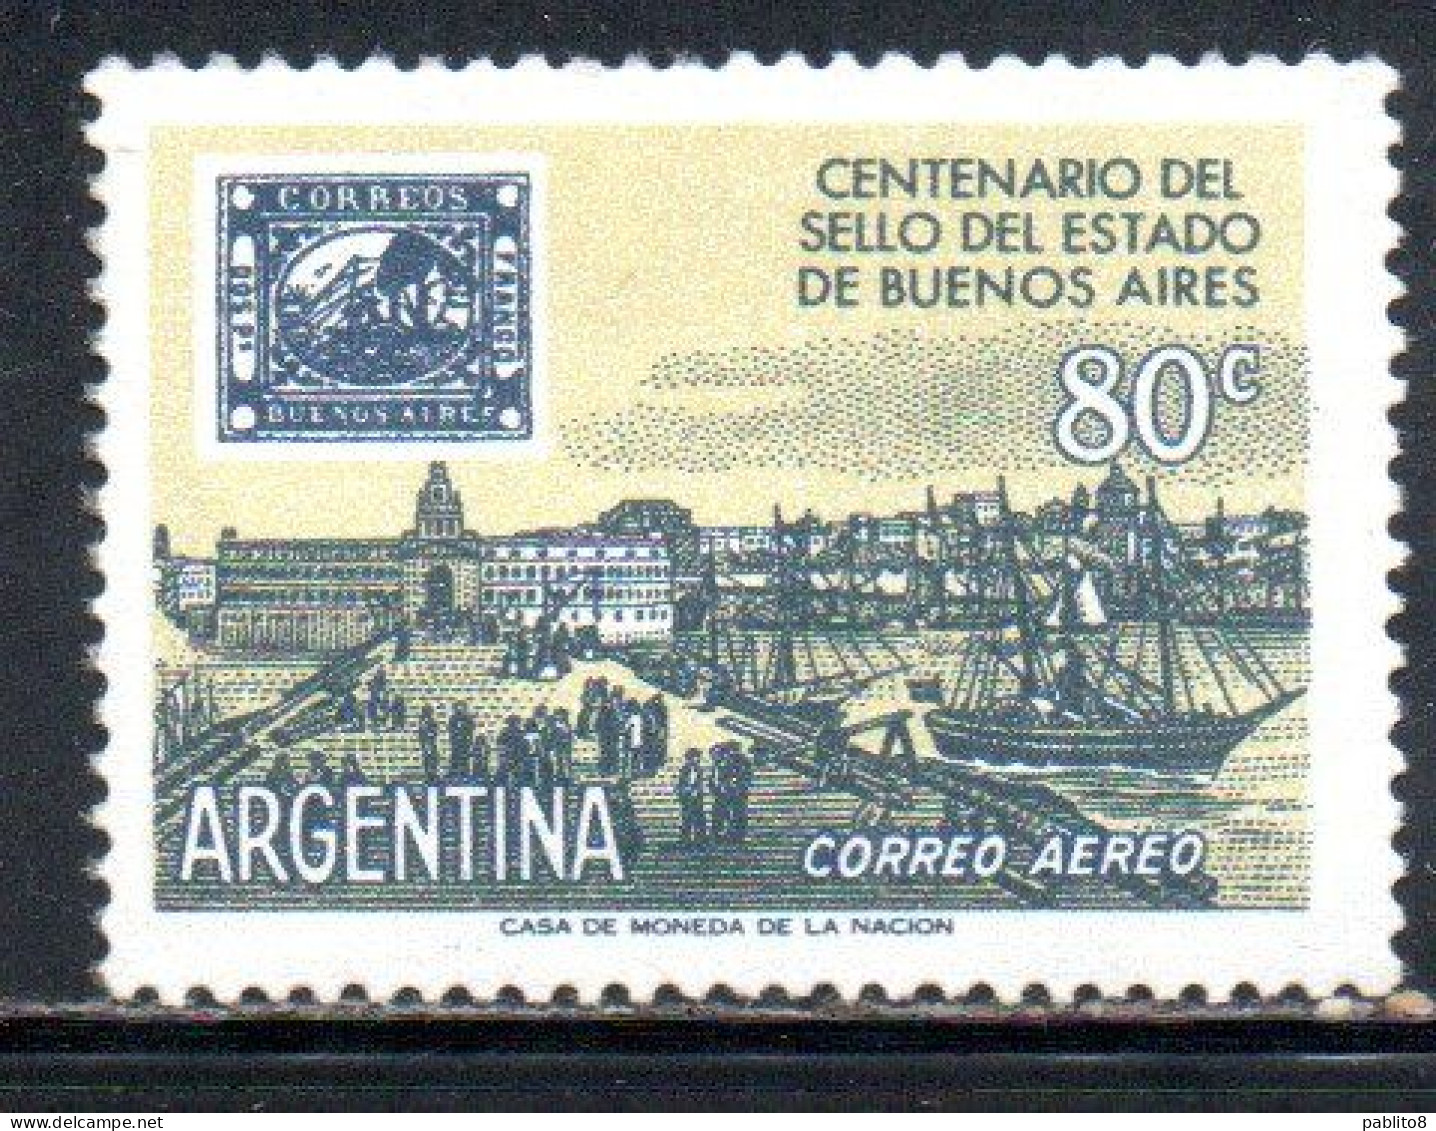 ARGENTINA 1958 AIR POST MAIL AIRMAIL CORREO AEREO CENTENARY FIRST POSTAGE STAMP BUENOS AIRES PLAZA DE LA ADUANA 80c MH - Luftpost